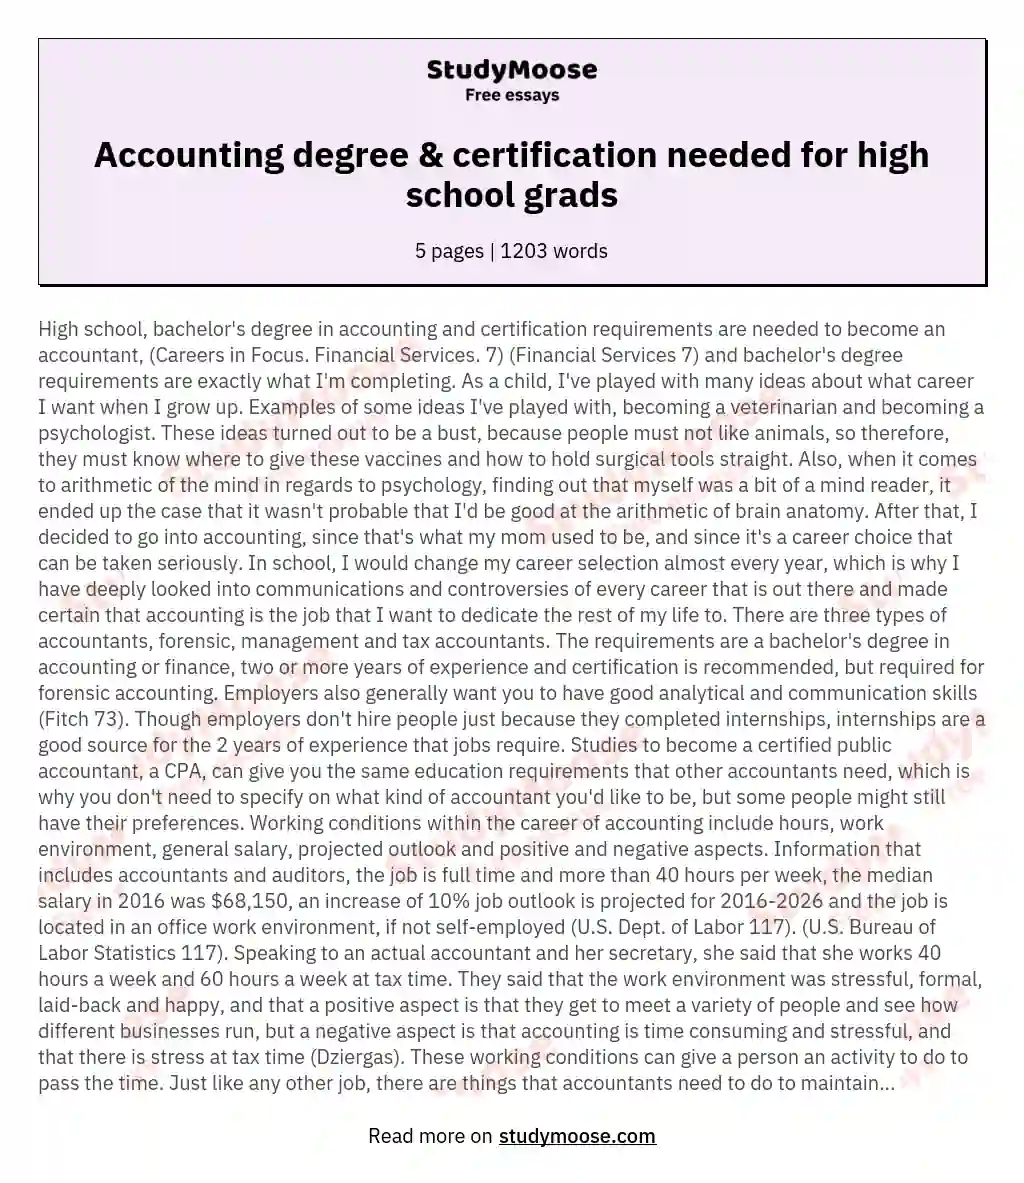 High school bachelor's degree in accounting and certification requirements are needed to